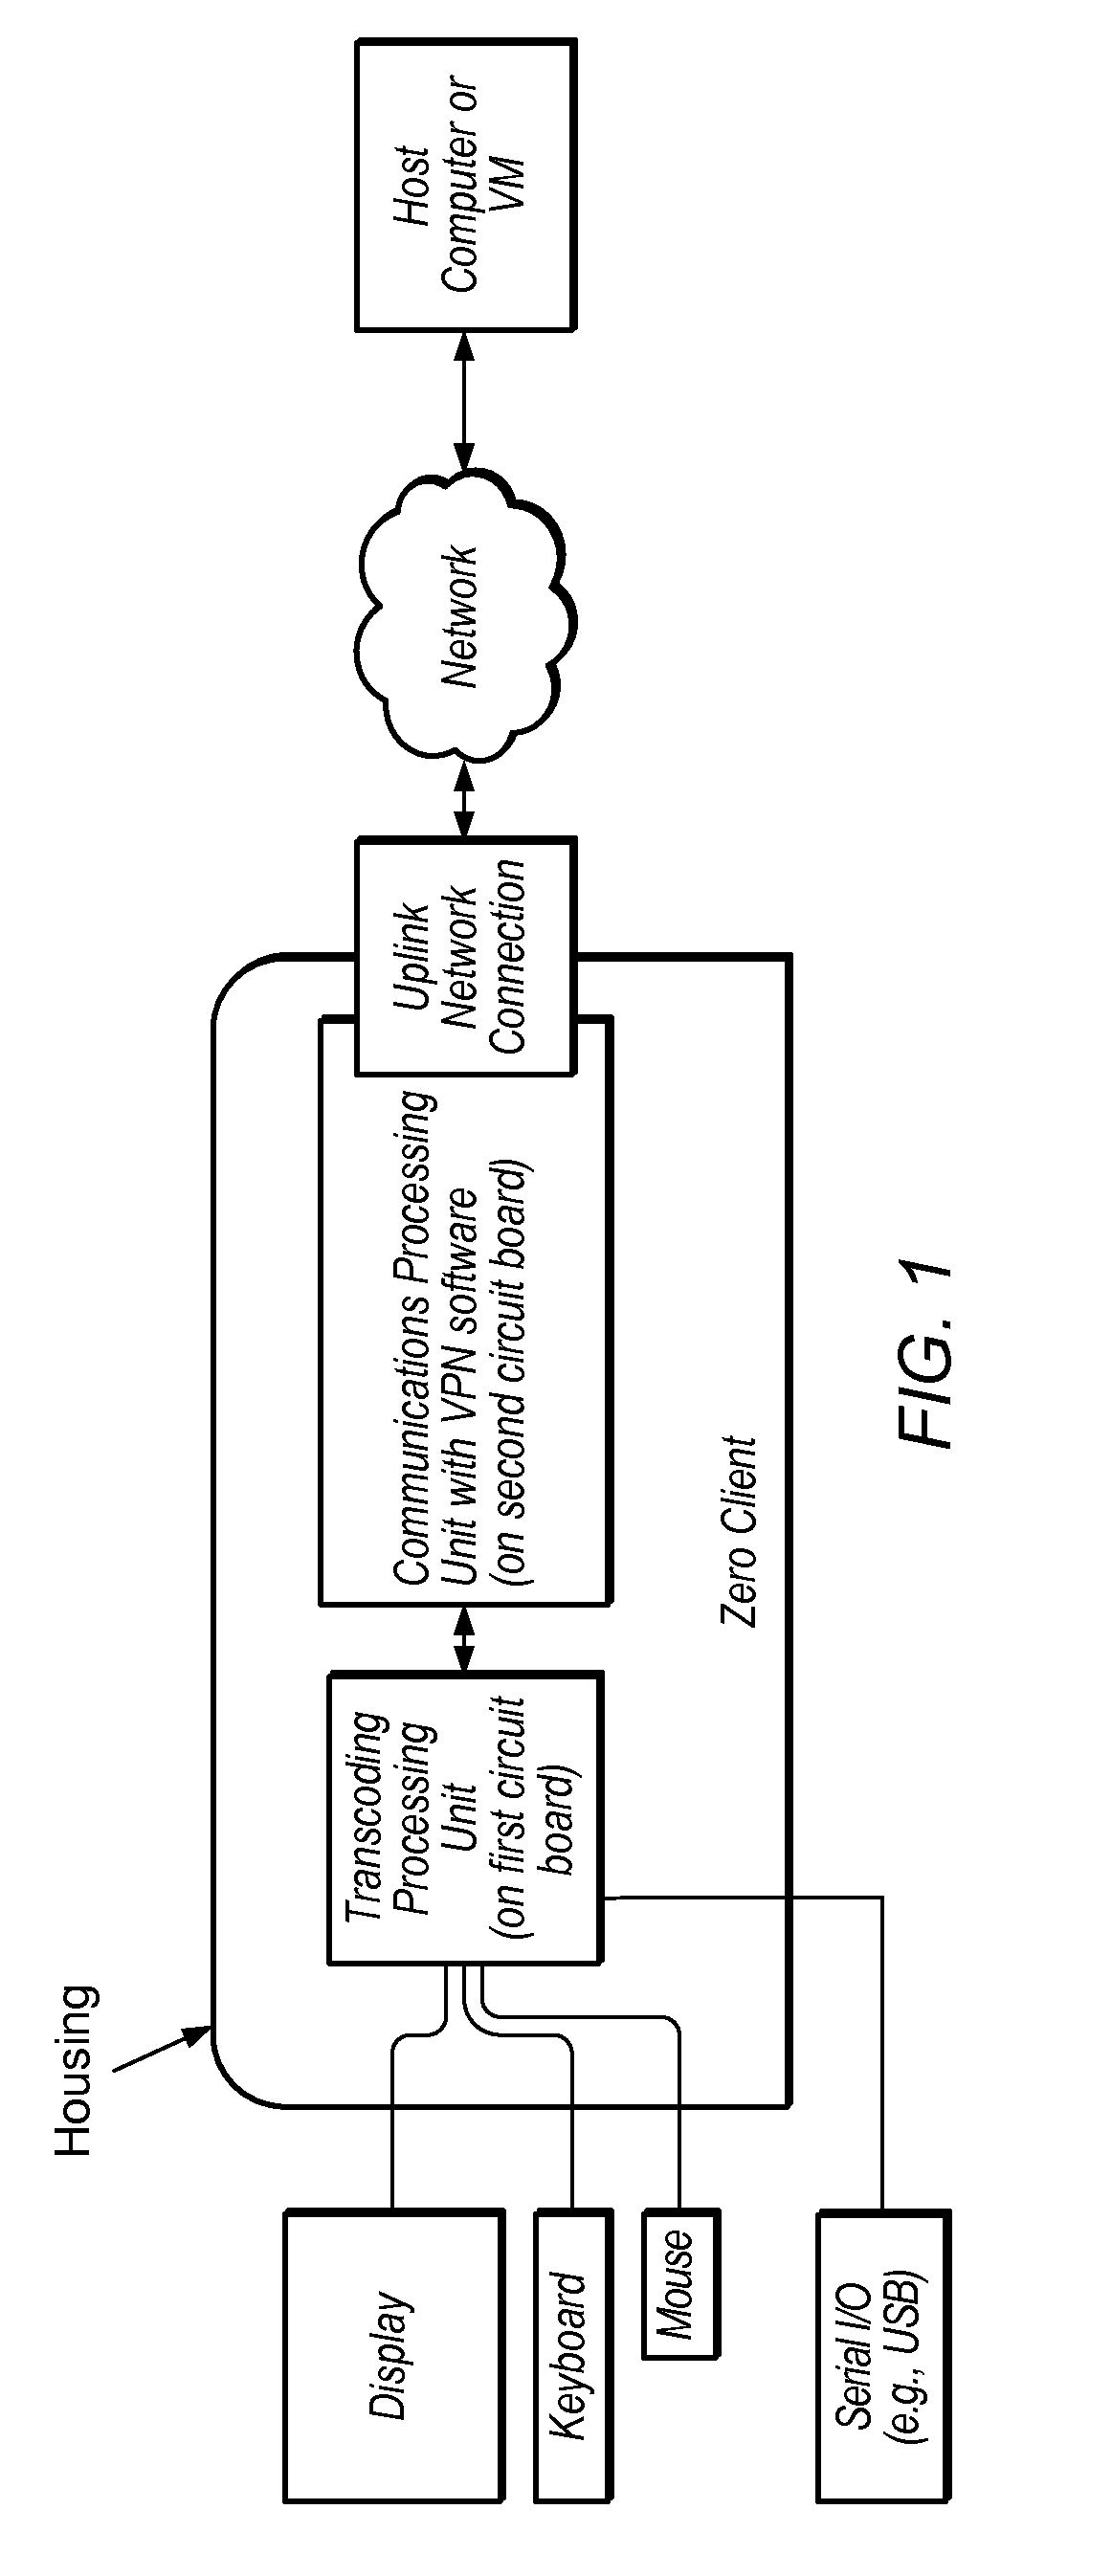 Zero client device with integrated serial or parallel ports